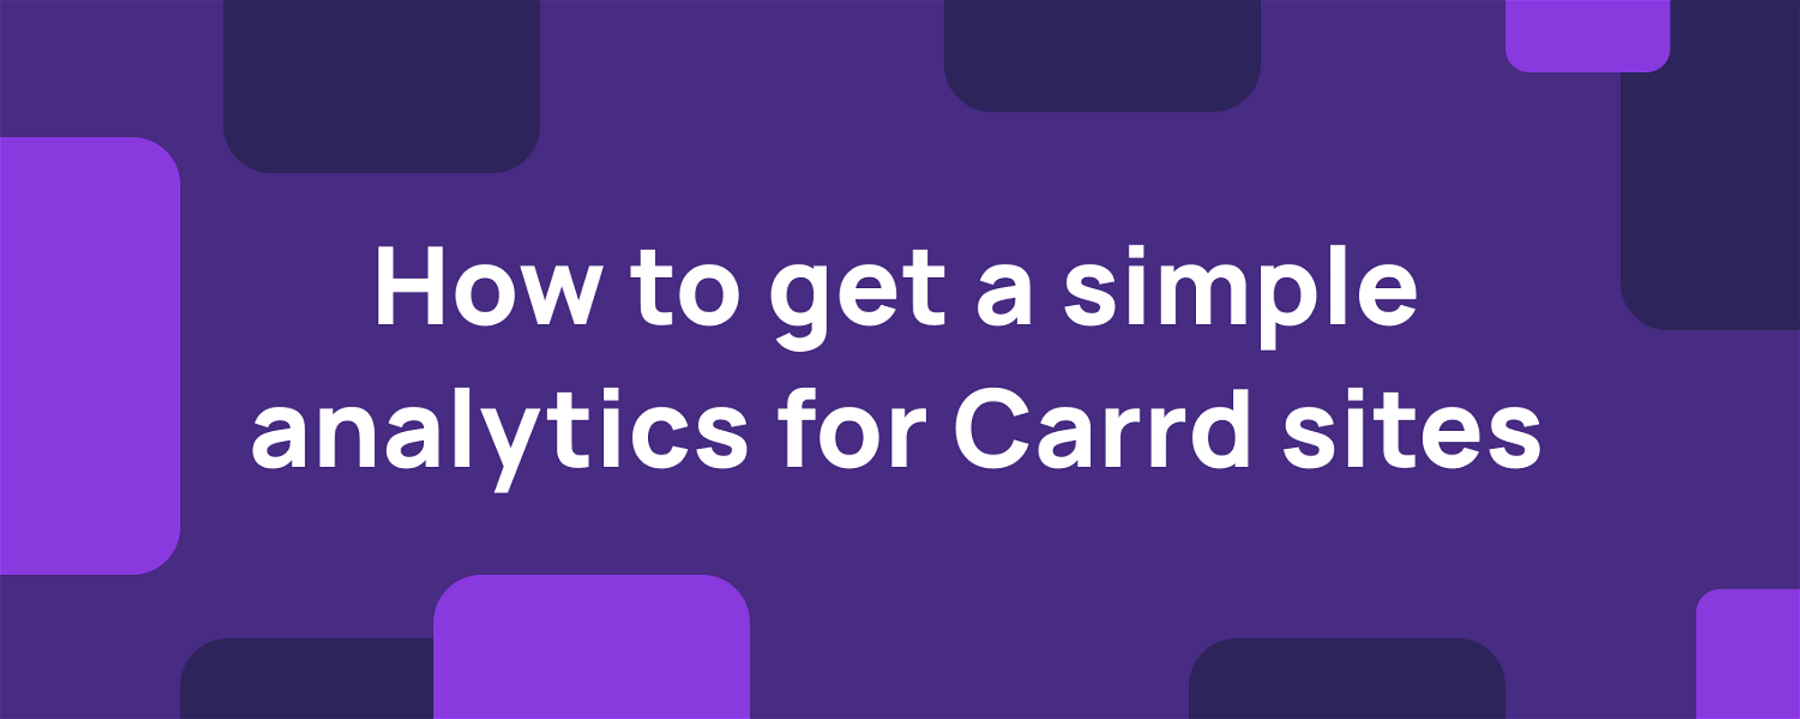 How to get a simple analytics for Carrd sites